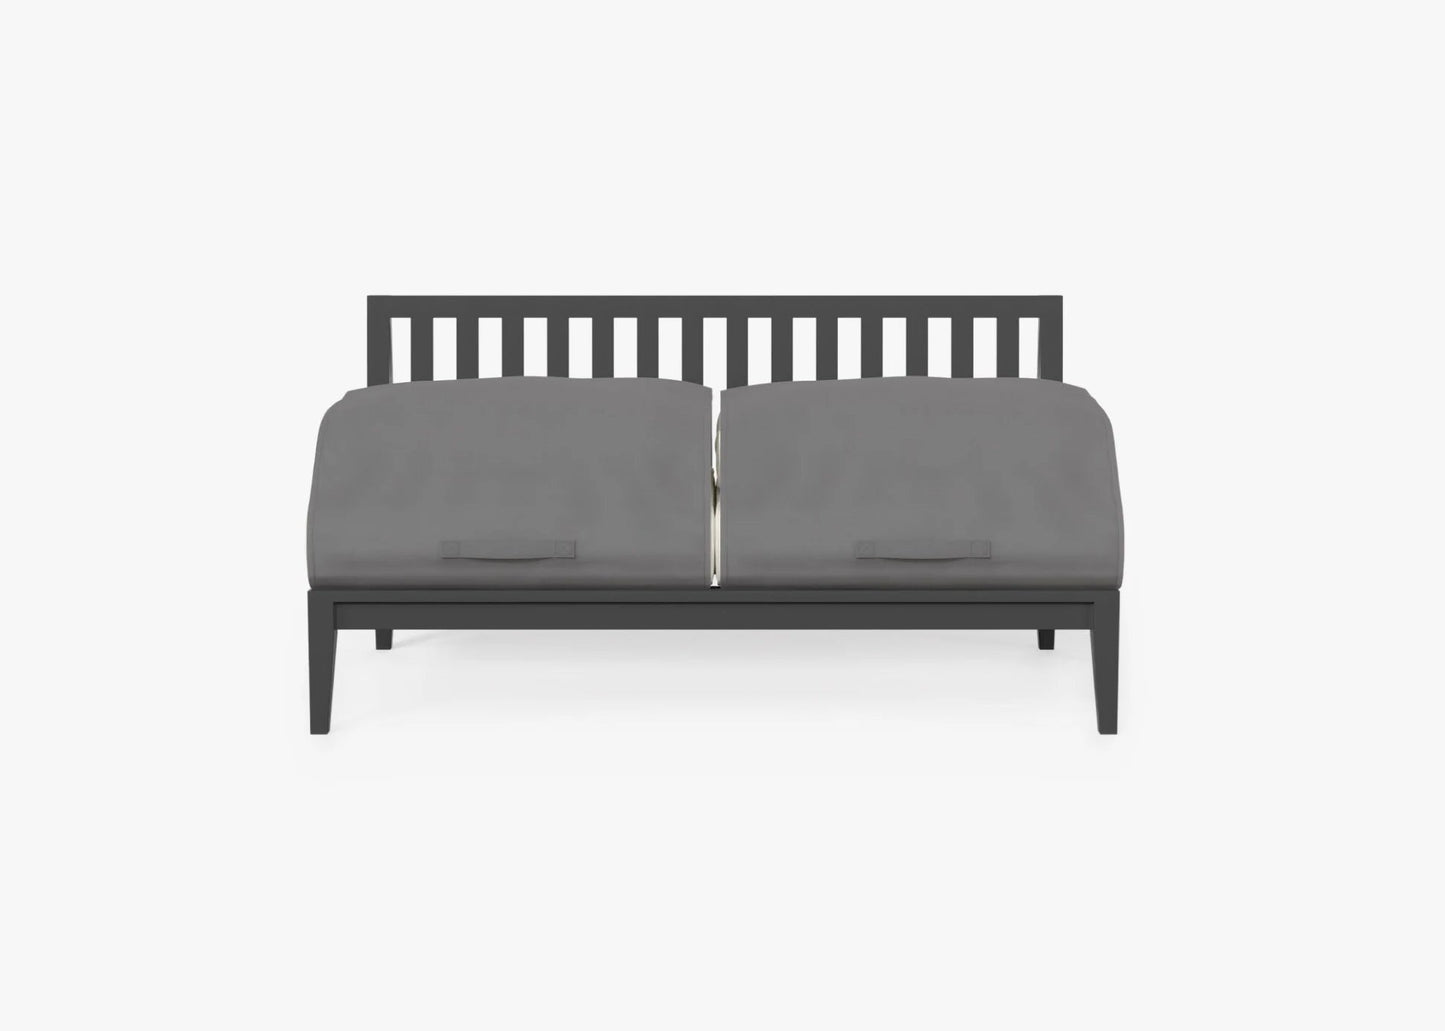 Live Outer 58" Charcoal Aluminum Outdoor Armless Loveseat With Palisades Cream Cushion